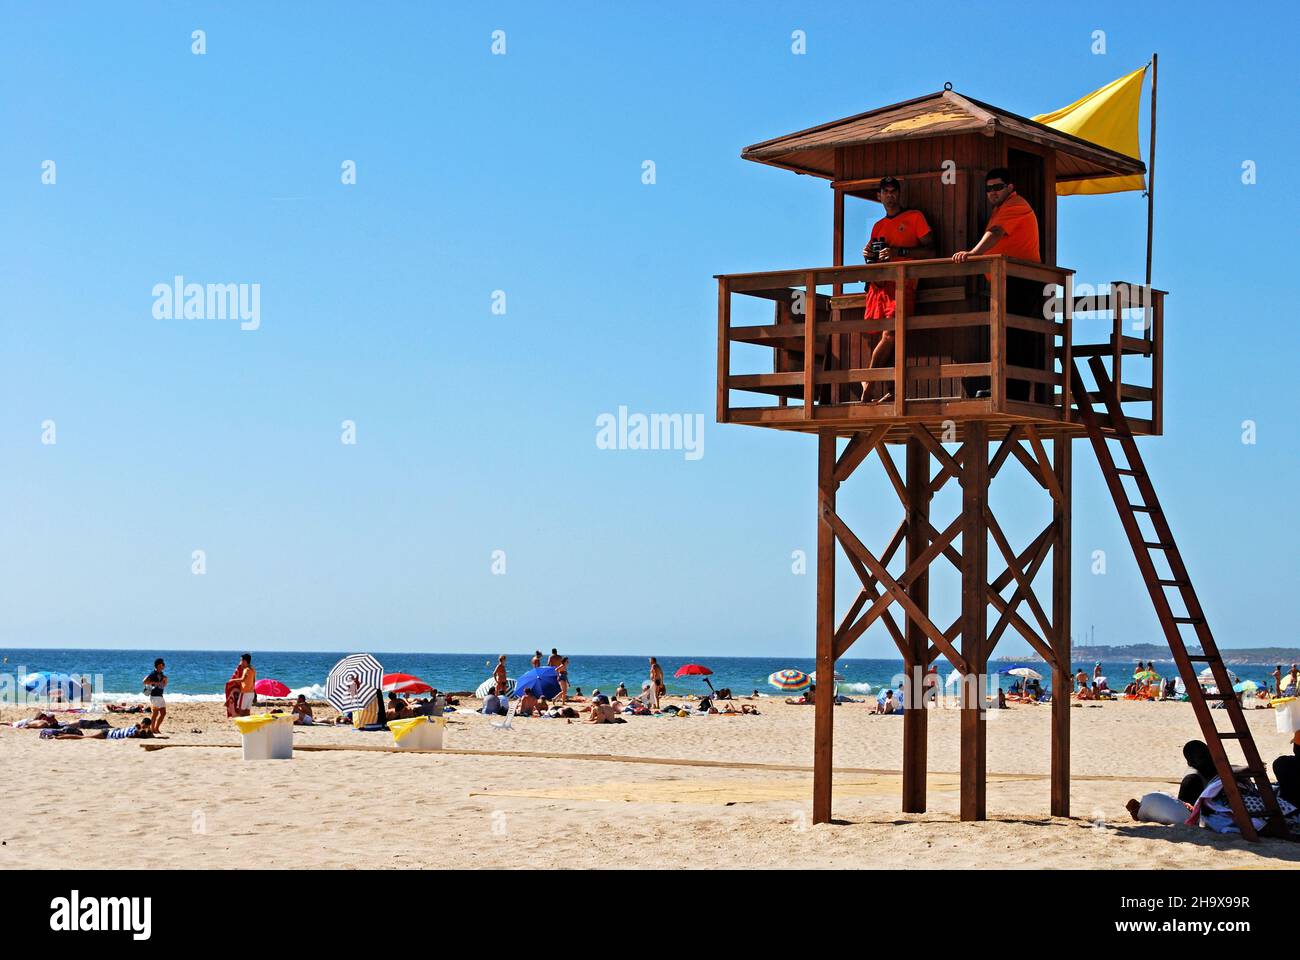 Lifeguards on a wooden tower on the beach with tourists enjoying the setting, Conil de la Frontera, Spain. Stock Photo